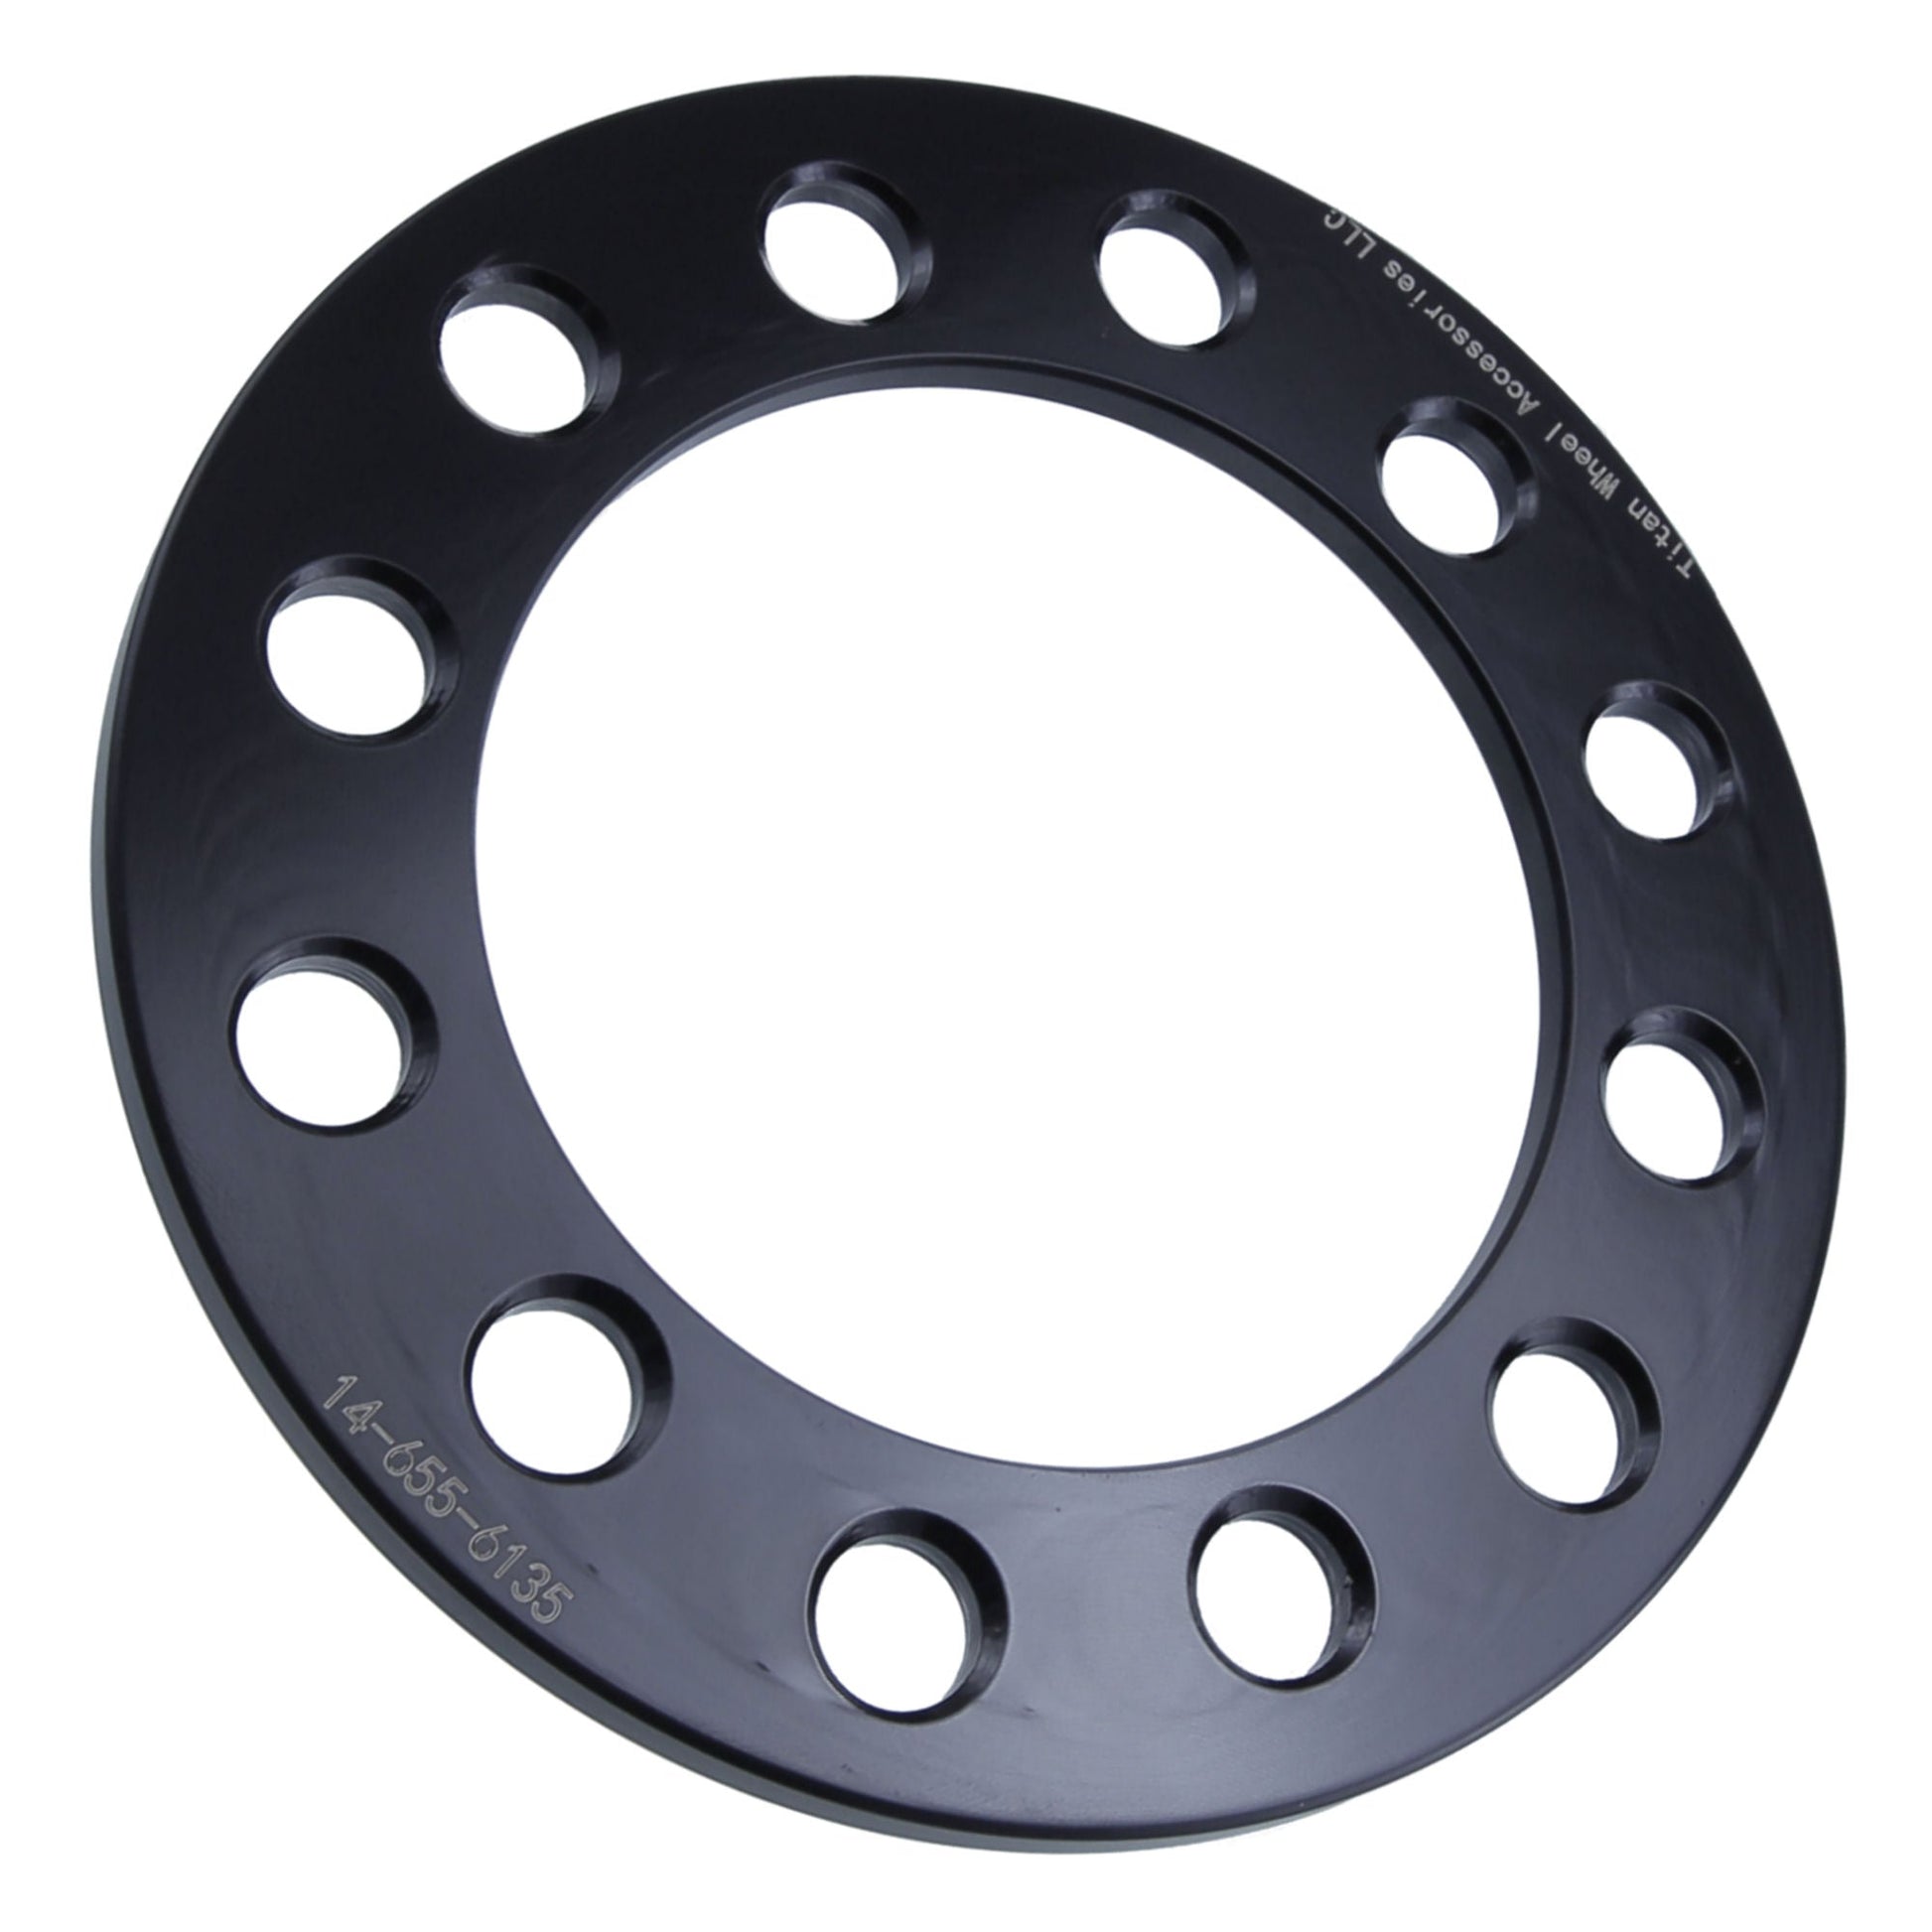 1/4" Titan Wheel Spacers for Ford F150 Expedition Raptor | 6x135 | Titan Wheel Accessories